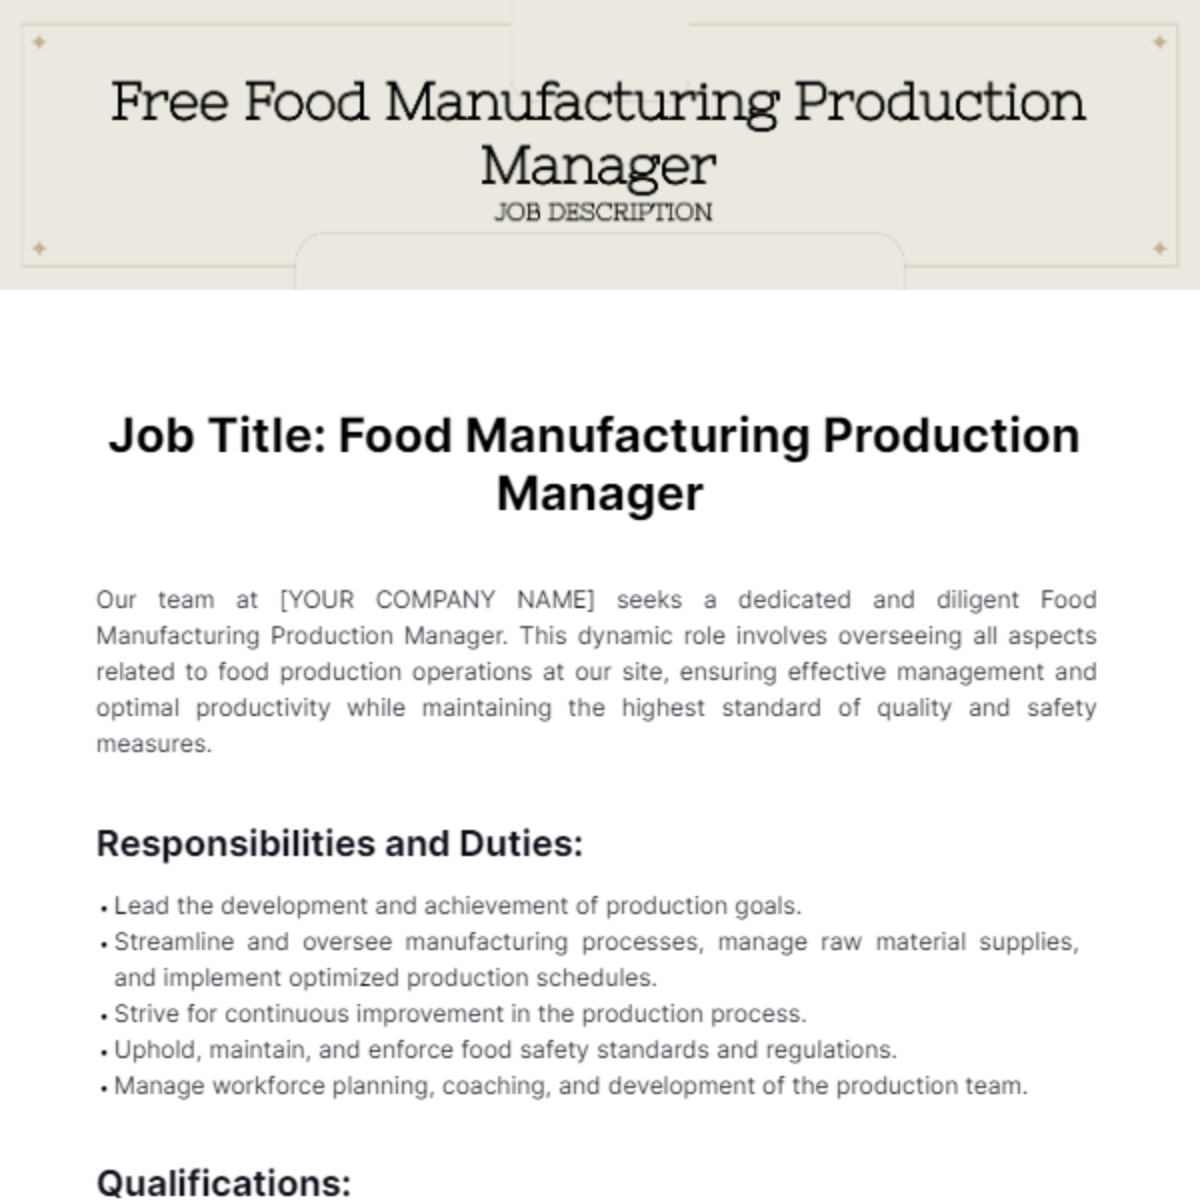 Free Food Manufacturing Production Manager Job Description Template